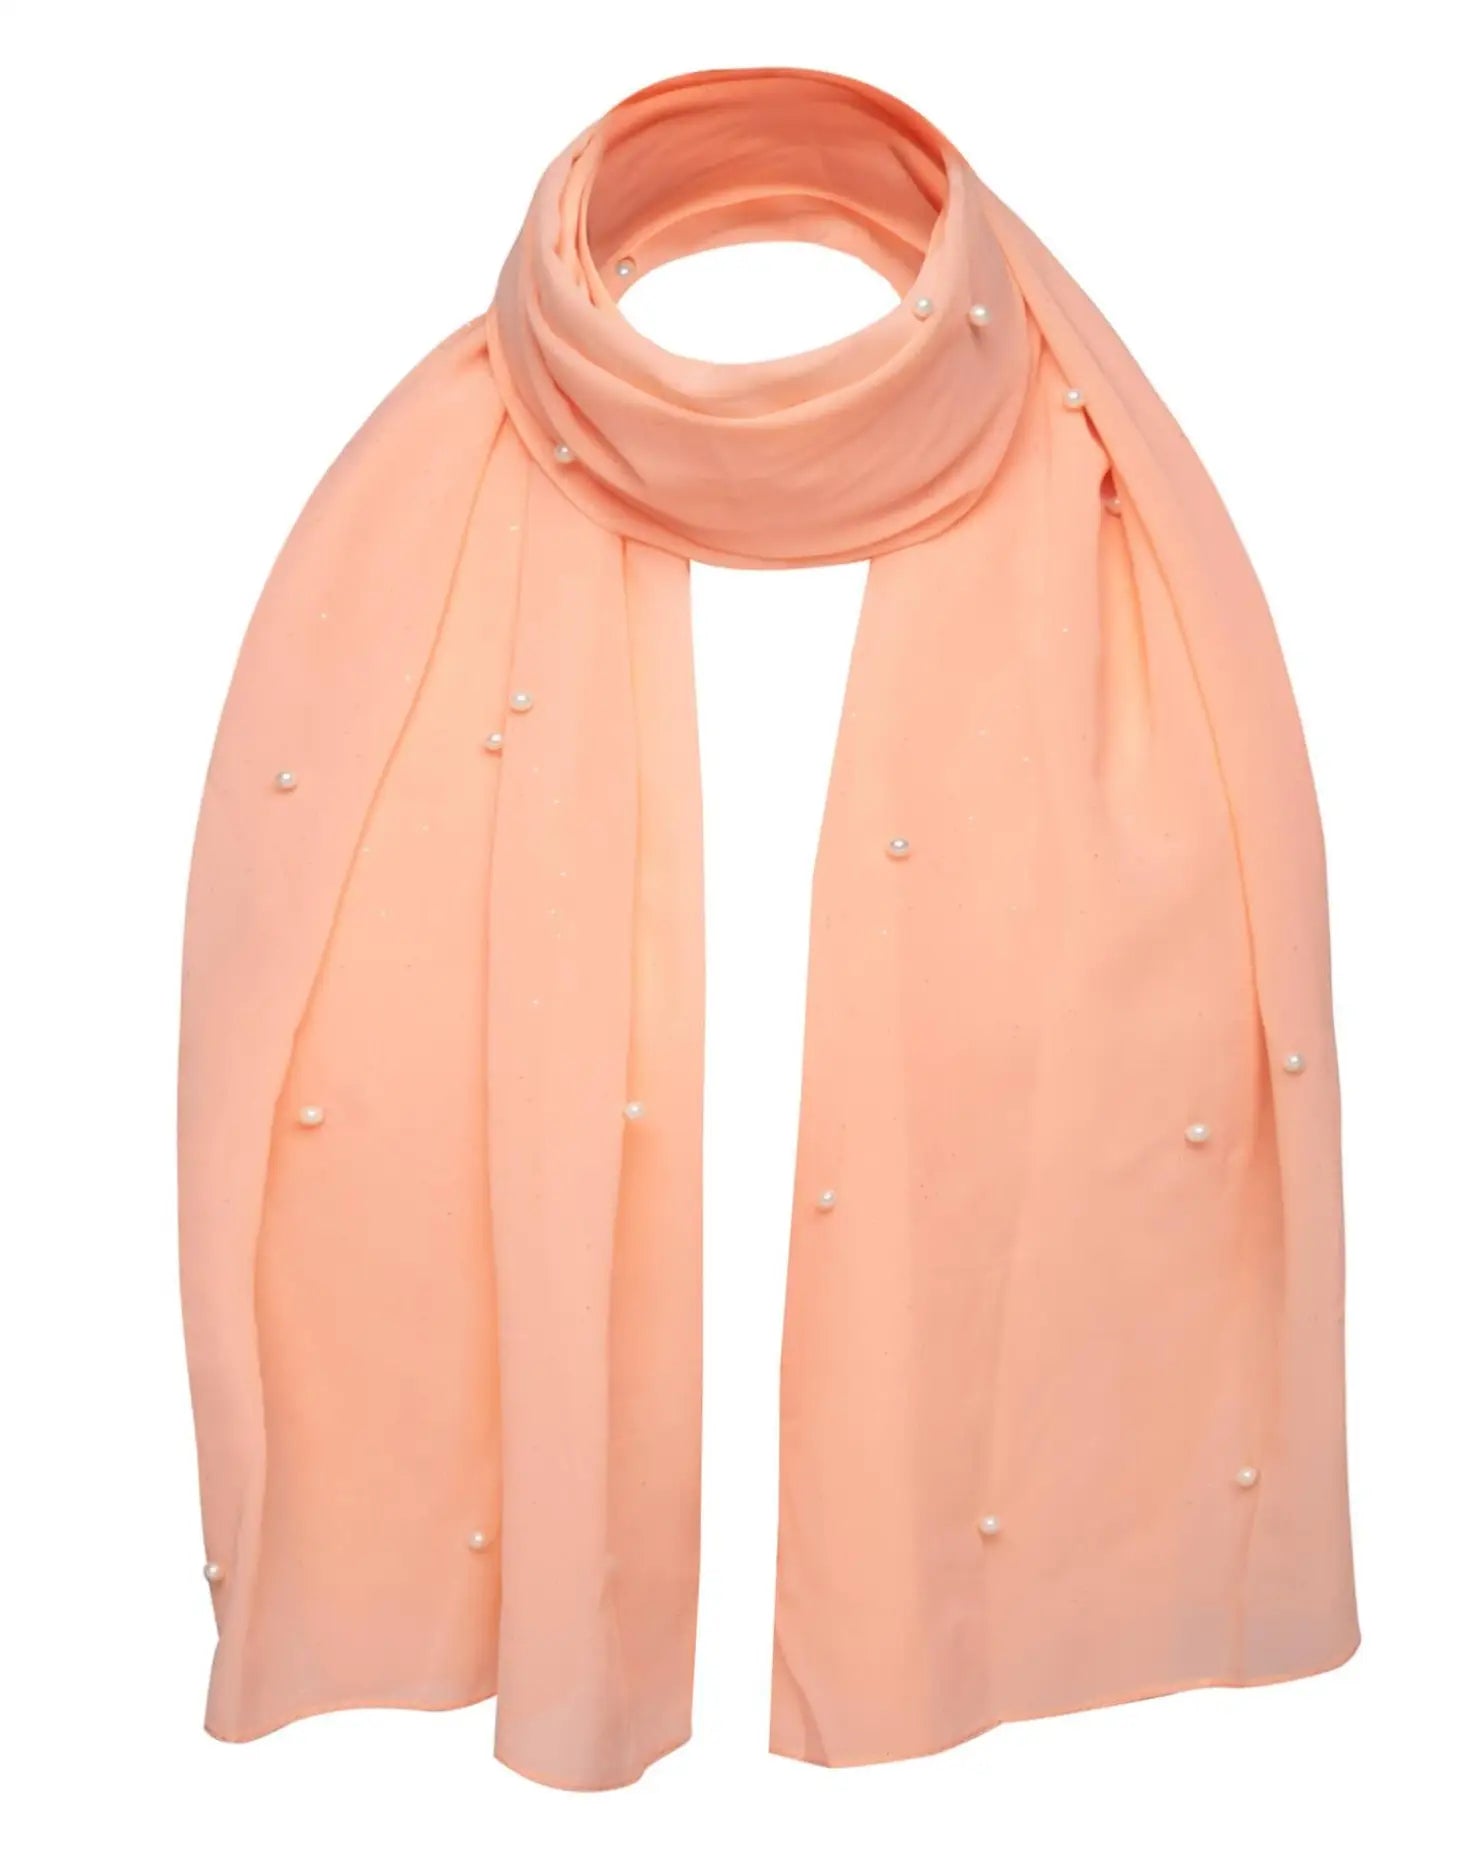 Pearl chiffon scarf with pearl attachments and peach color